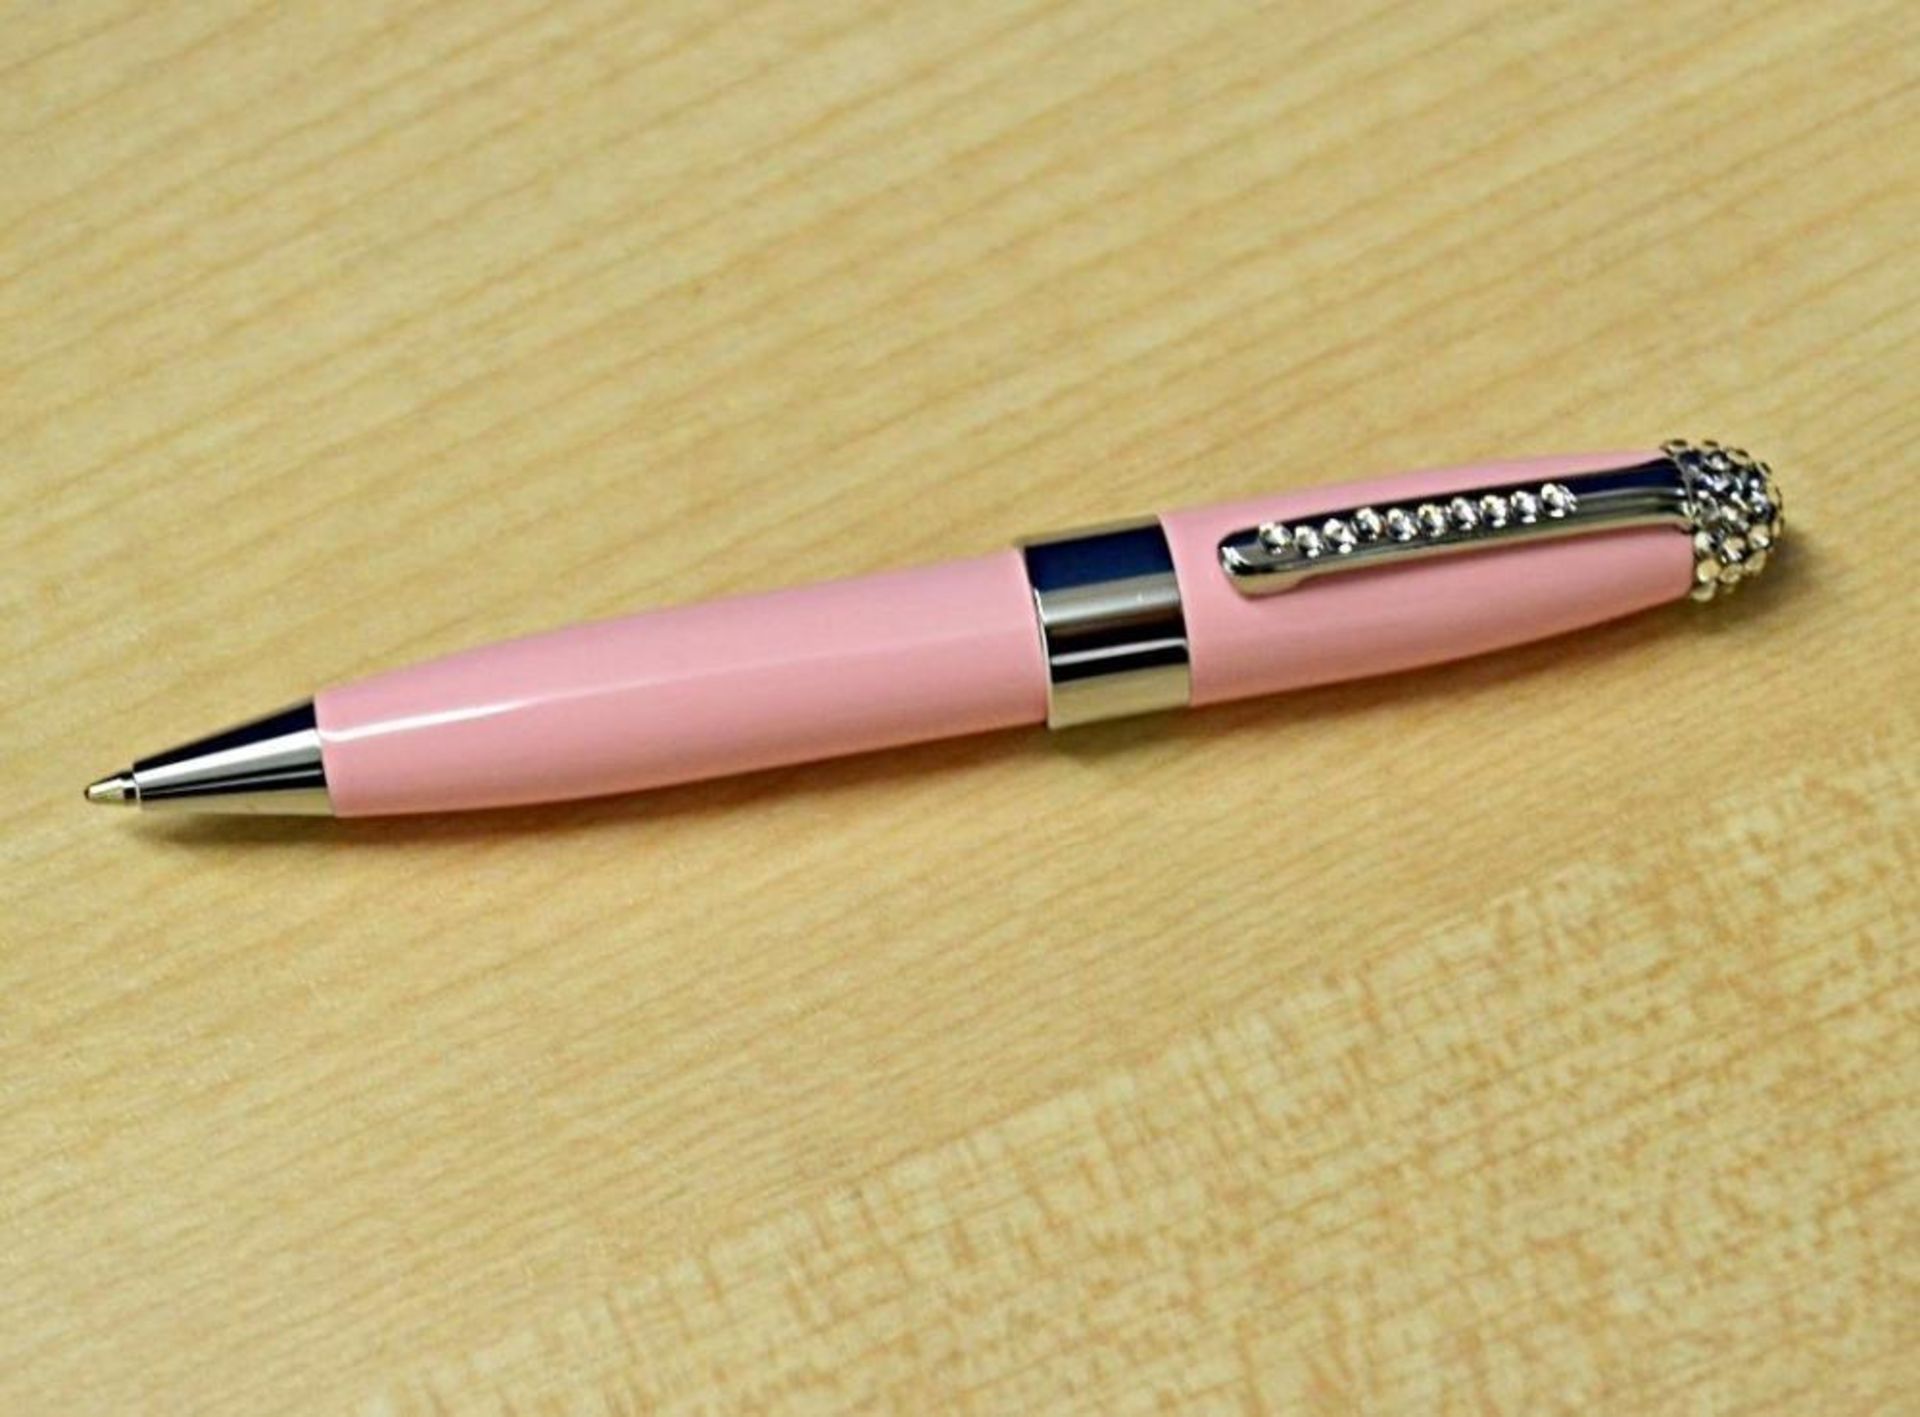 10 x ICE LONDON "Duchess" Ladies Pens - All Embellished With SWAROVSKI Crystals - Colour: Light Pink - Image 2 of 3